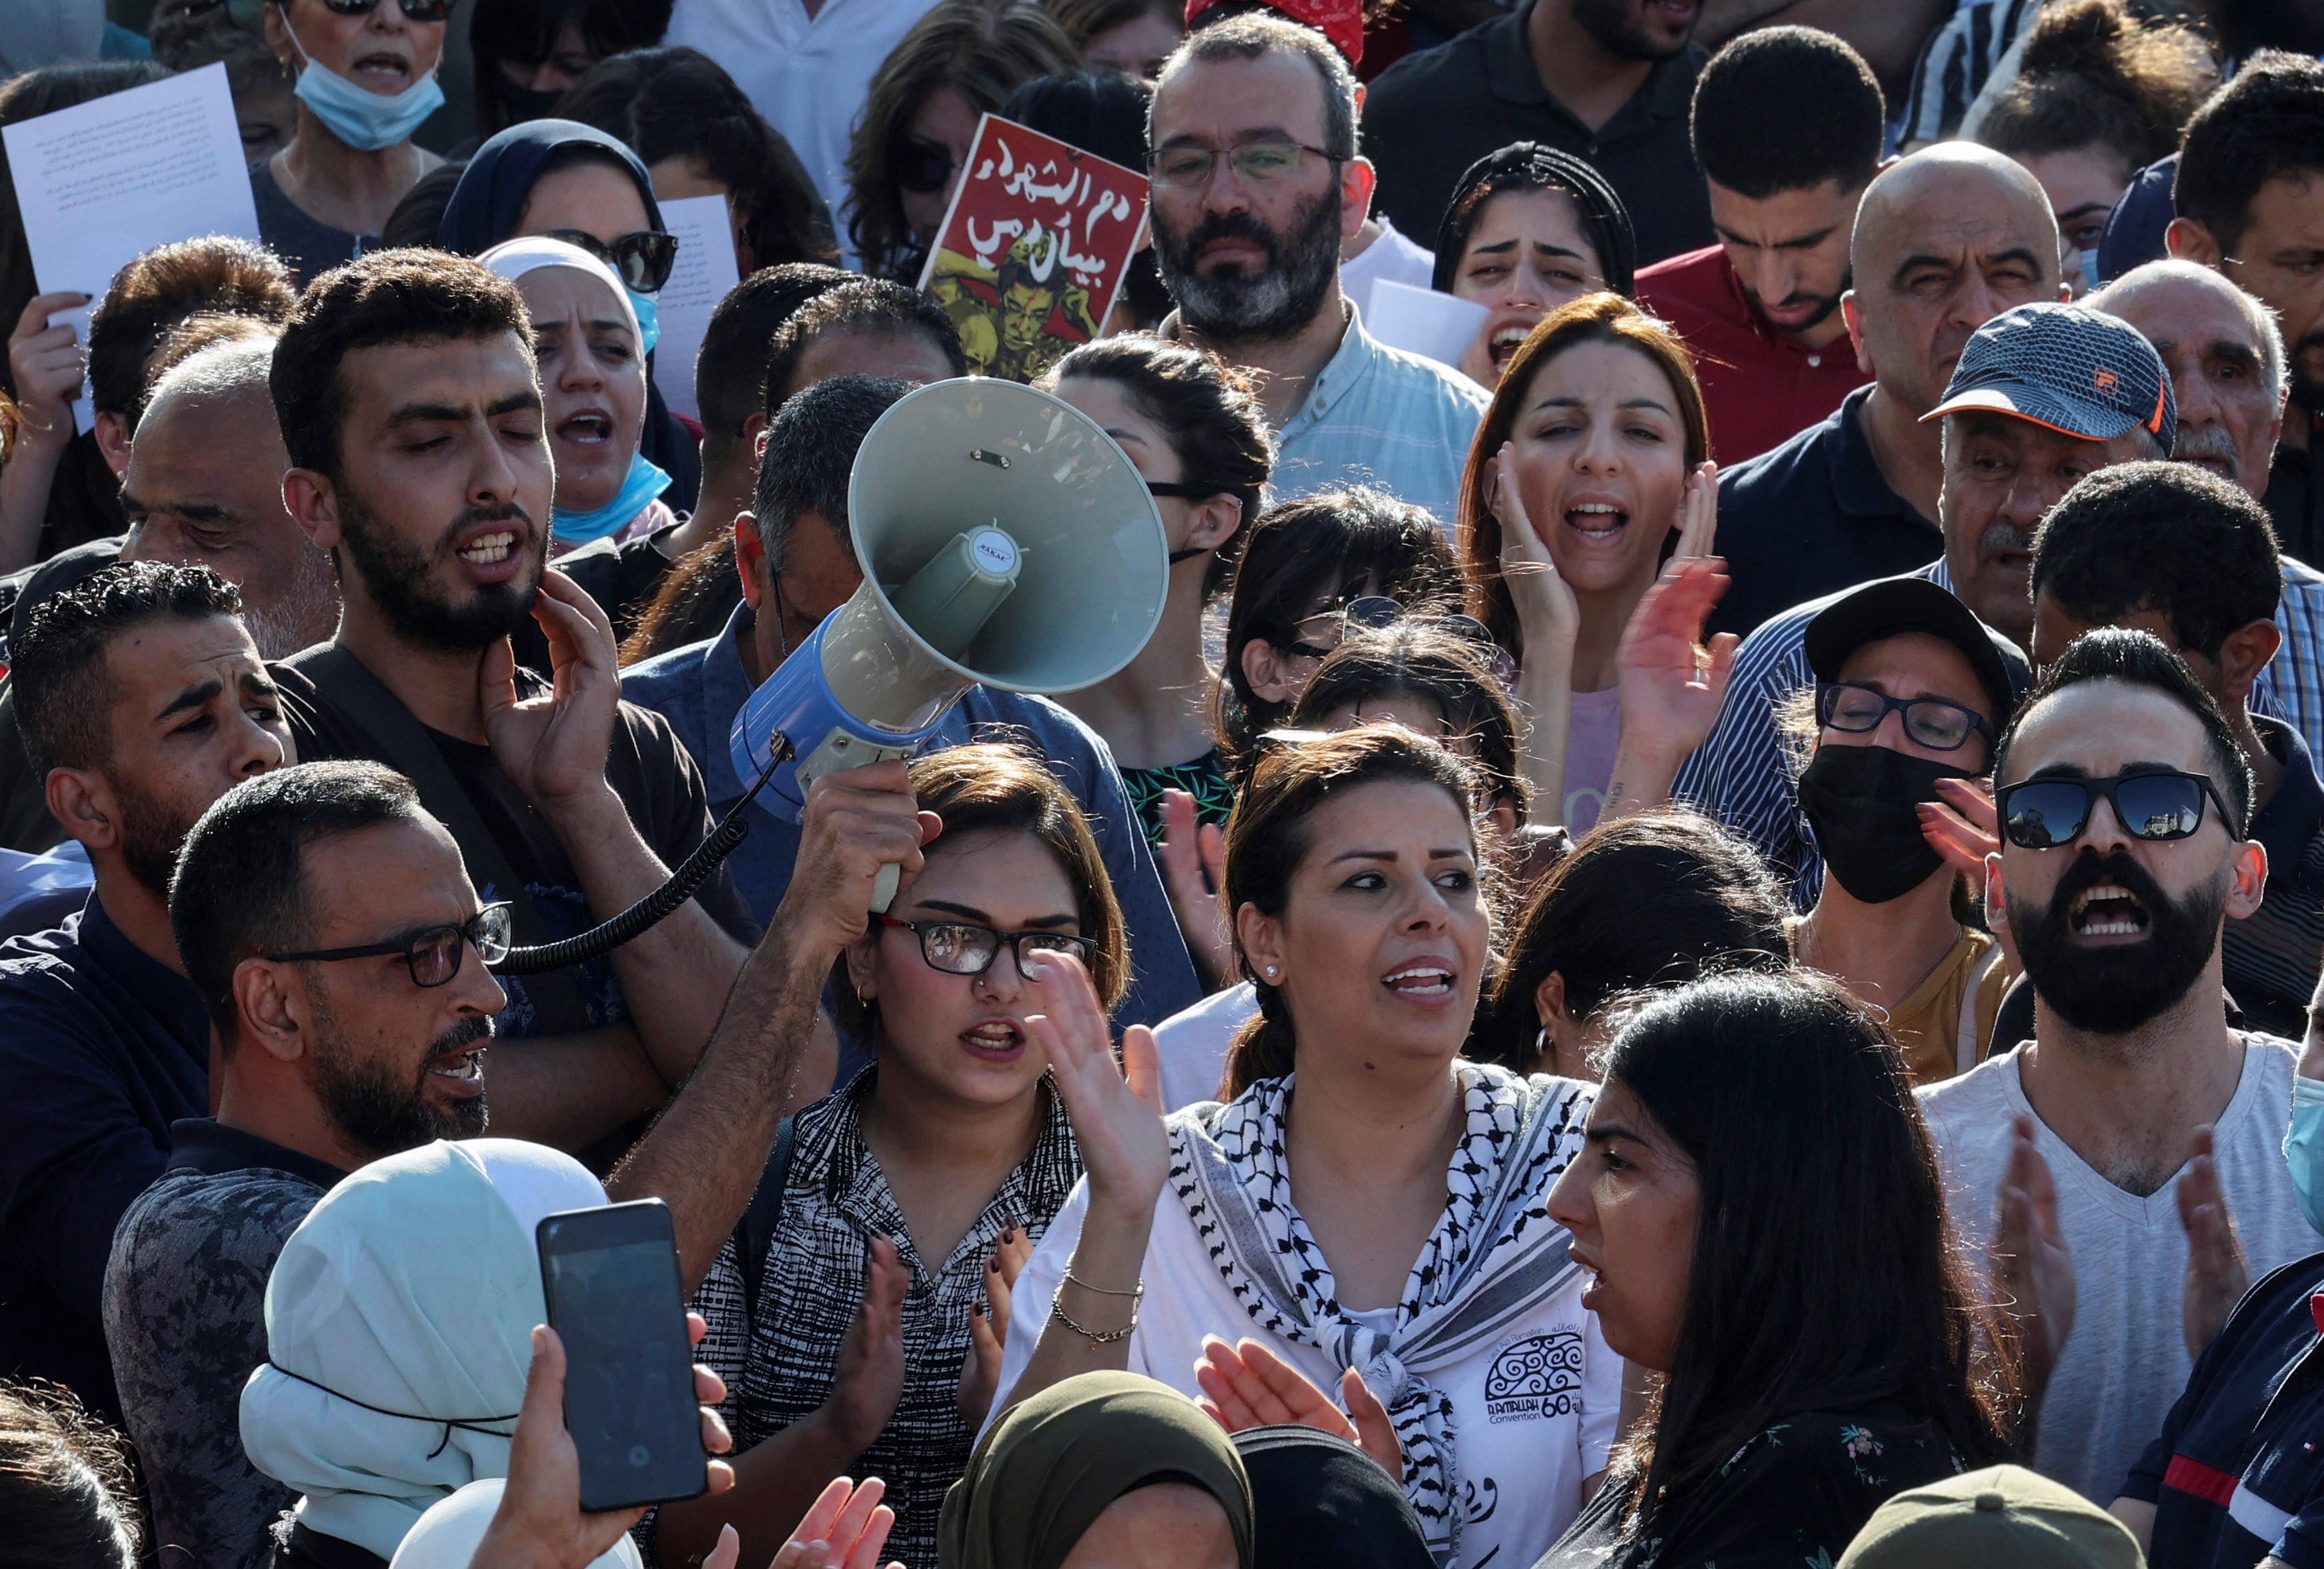 Palestinian demonstrators chant during a rally in Ramallah city in the occupied West Bank on July 11, 2021